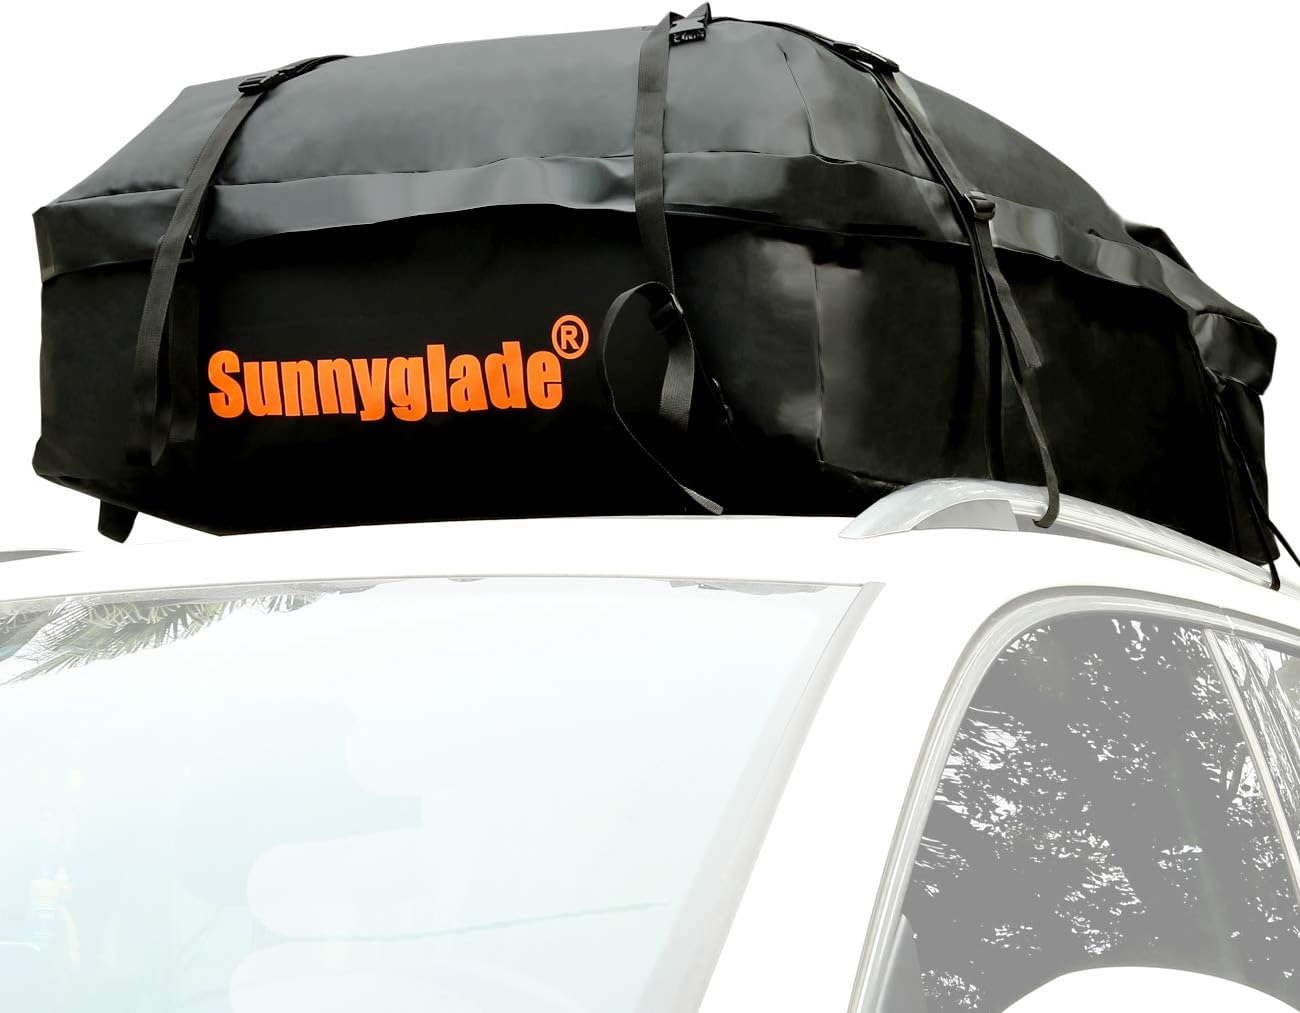  Sunnyglade Waterproof Roof Top Cargo Bag 15 Cubic Feet, cargo bag without roof rack